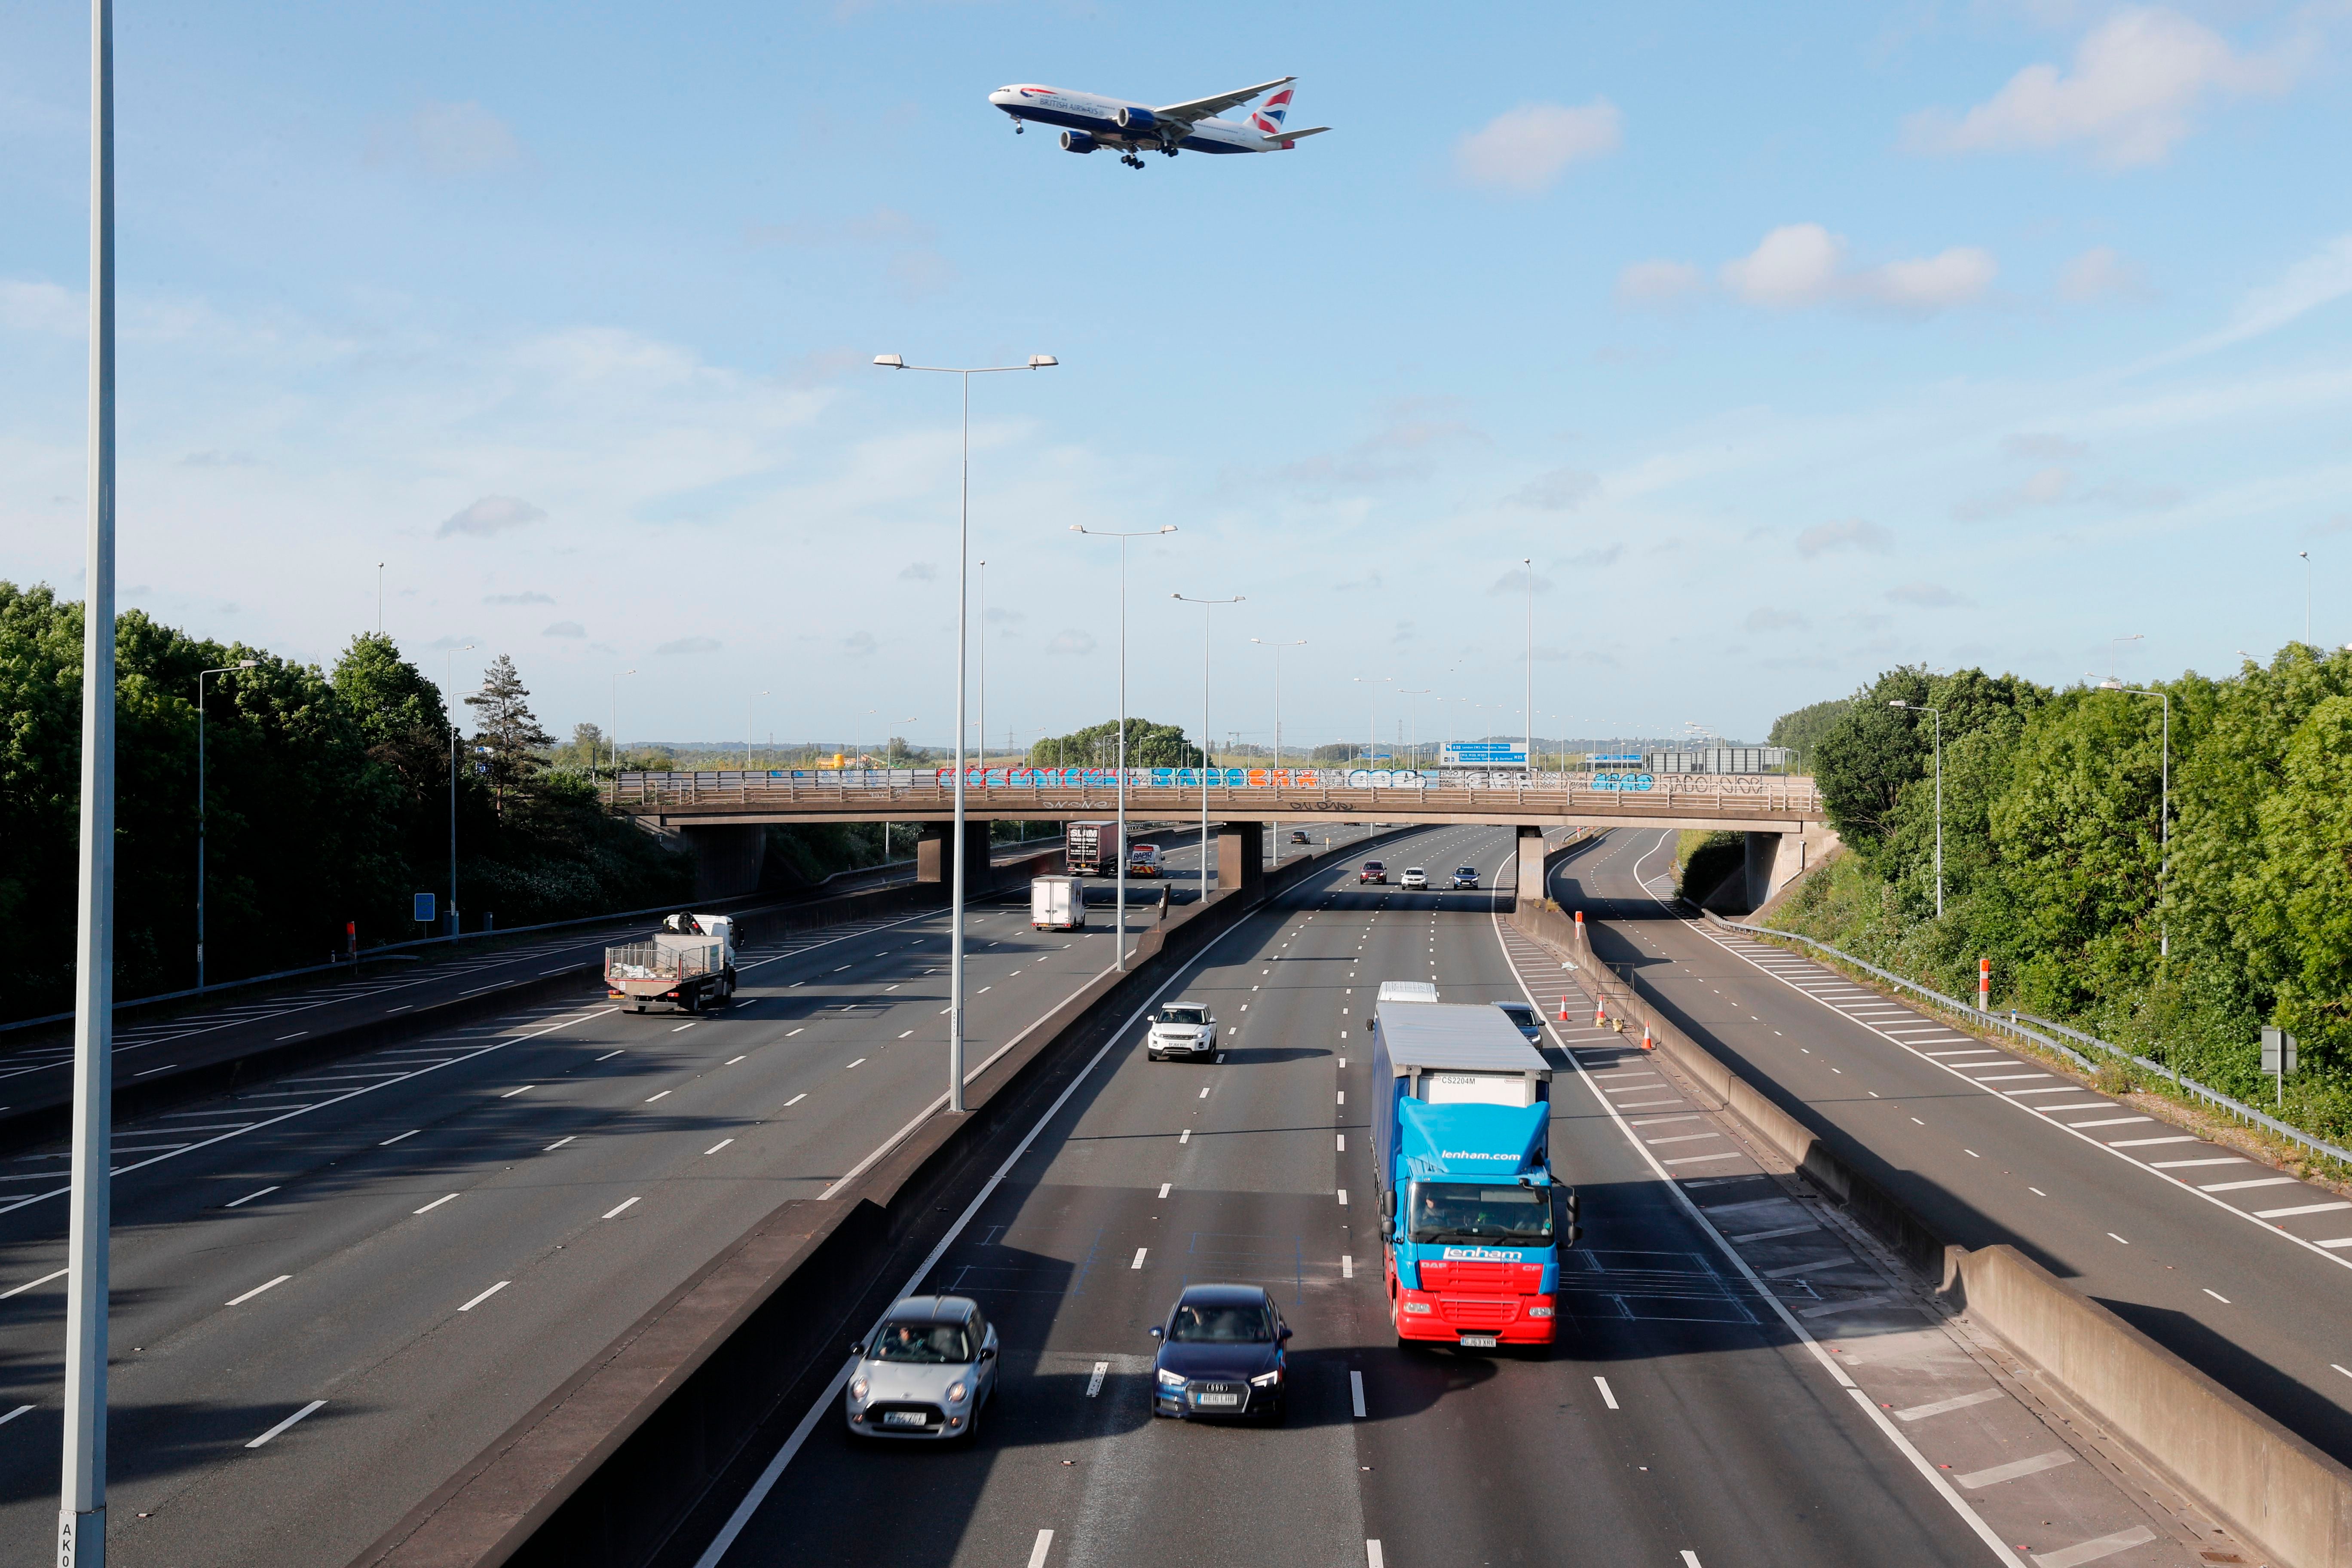 The proposed new road plan would connect to the M2 near Rochester in Kent and the M25 in Essex between North and South Ockenden.